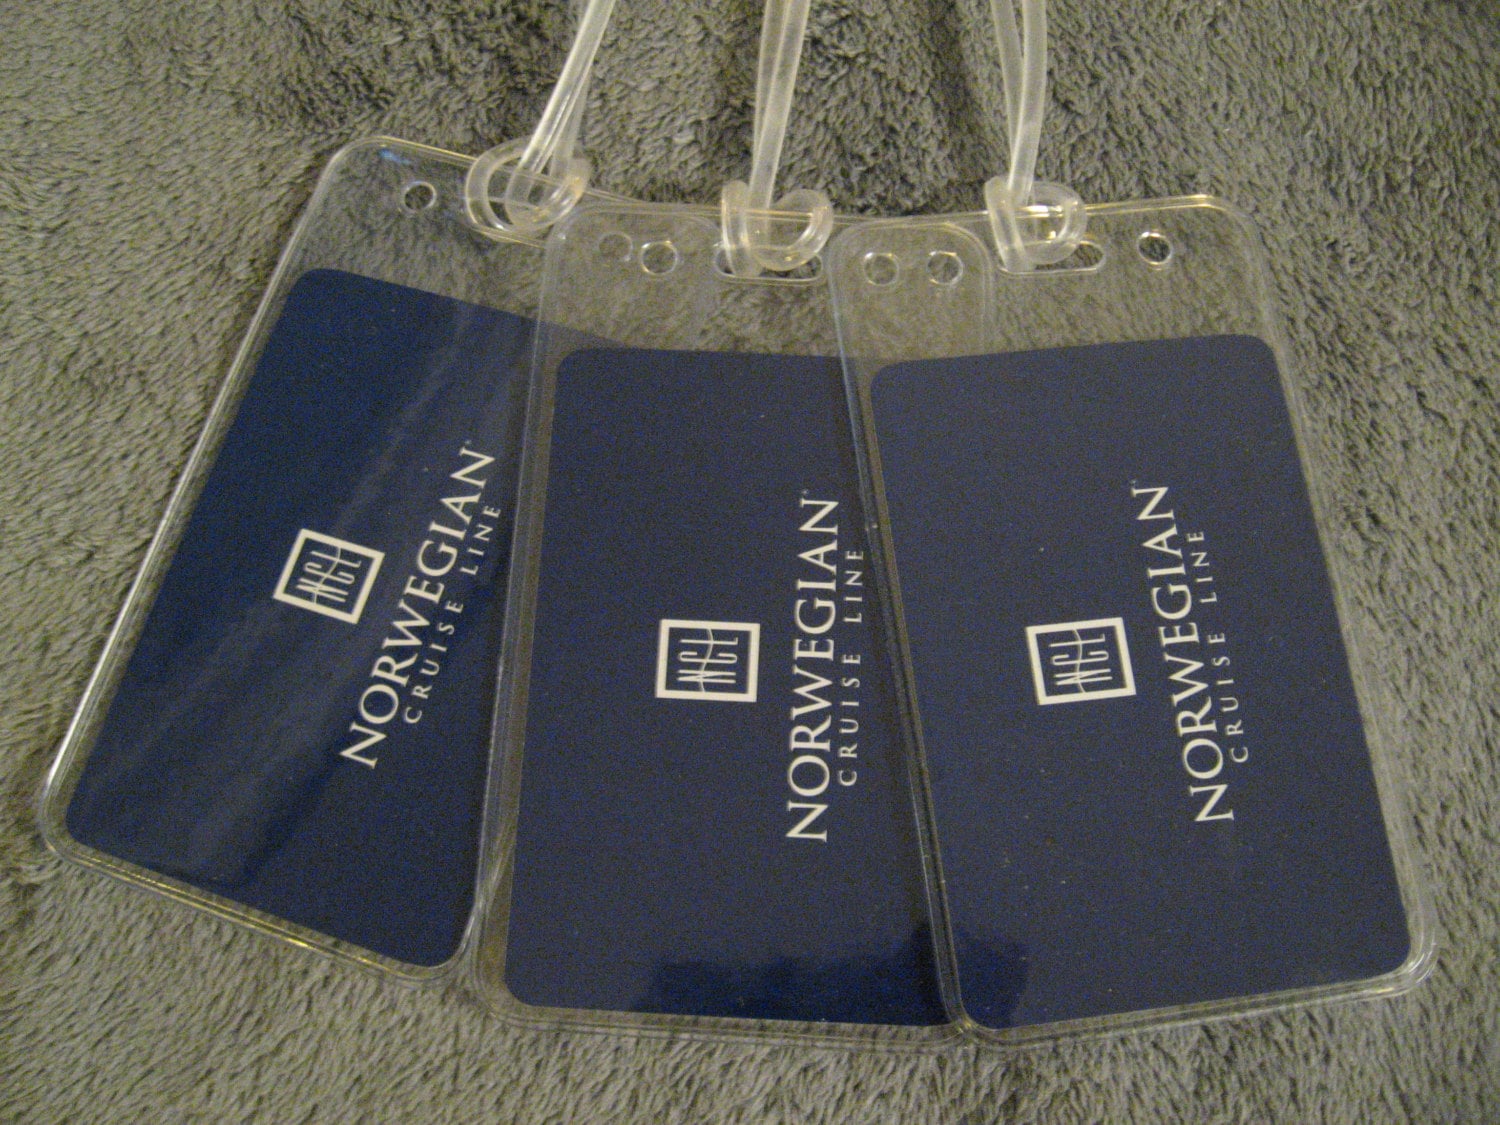 ncl-luggage-tags-norwegian-cruise-line-lines-ship-vintage